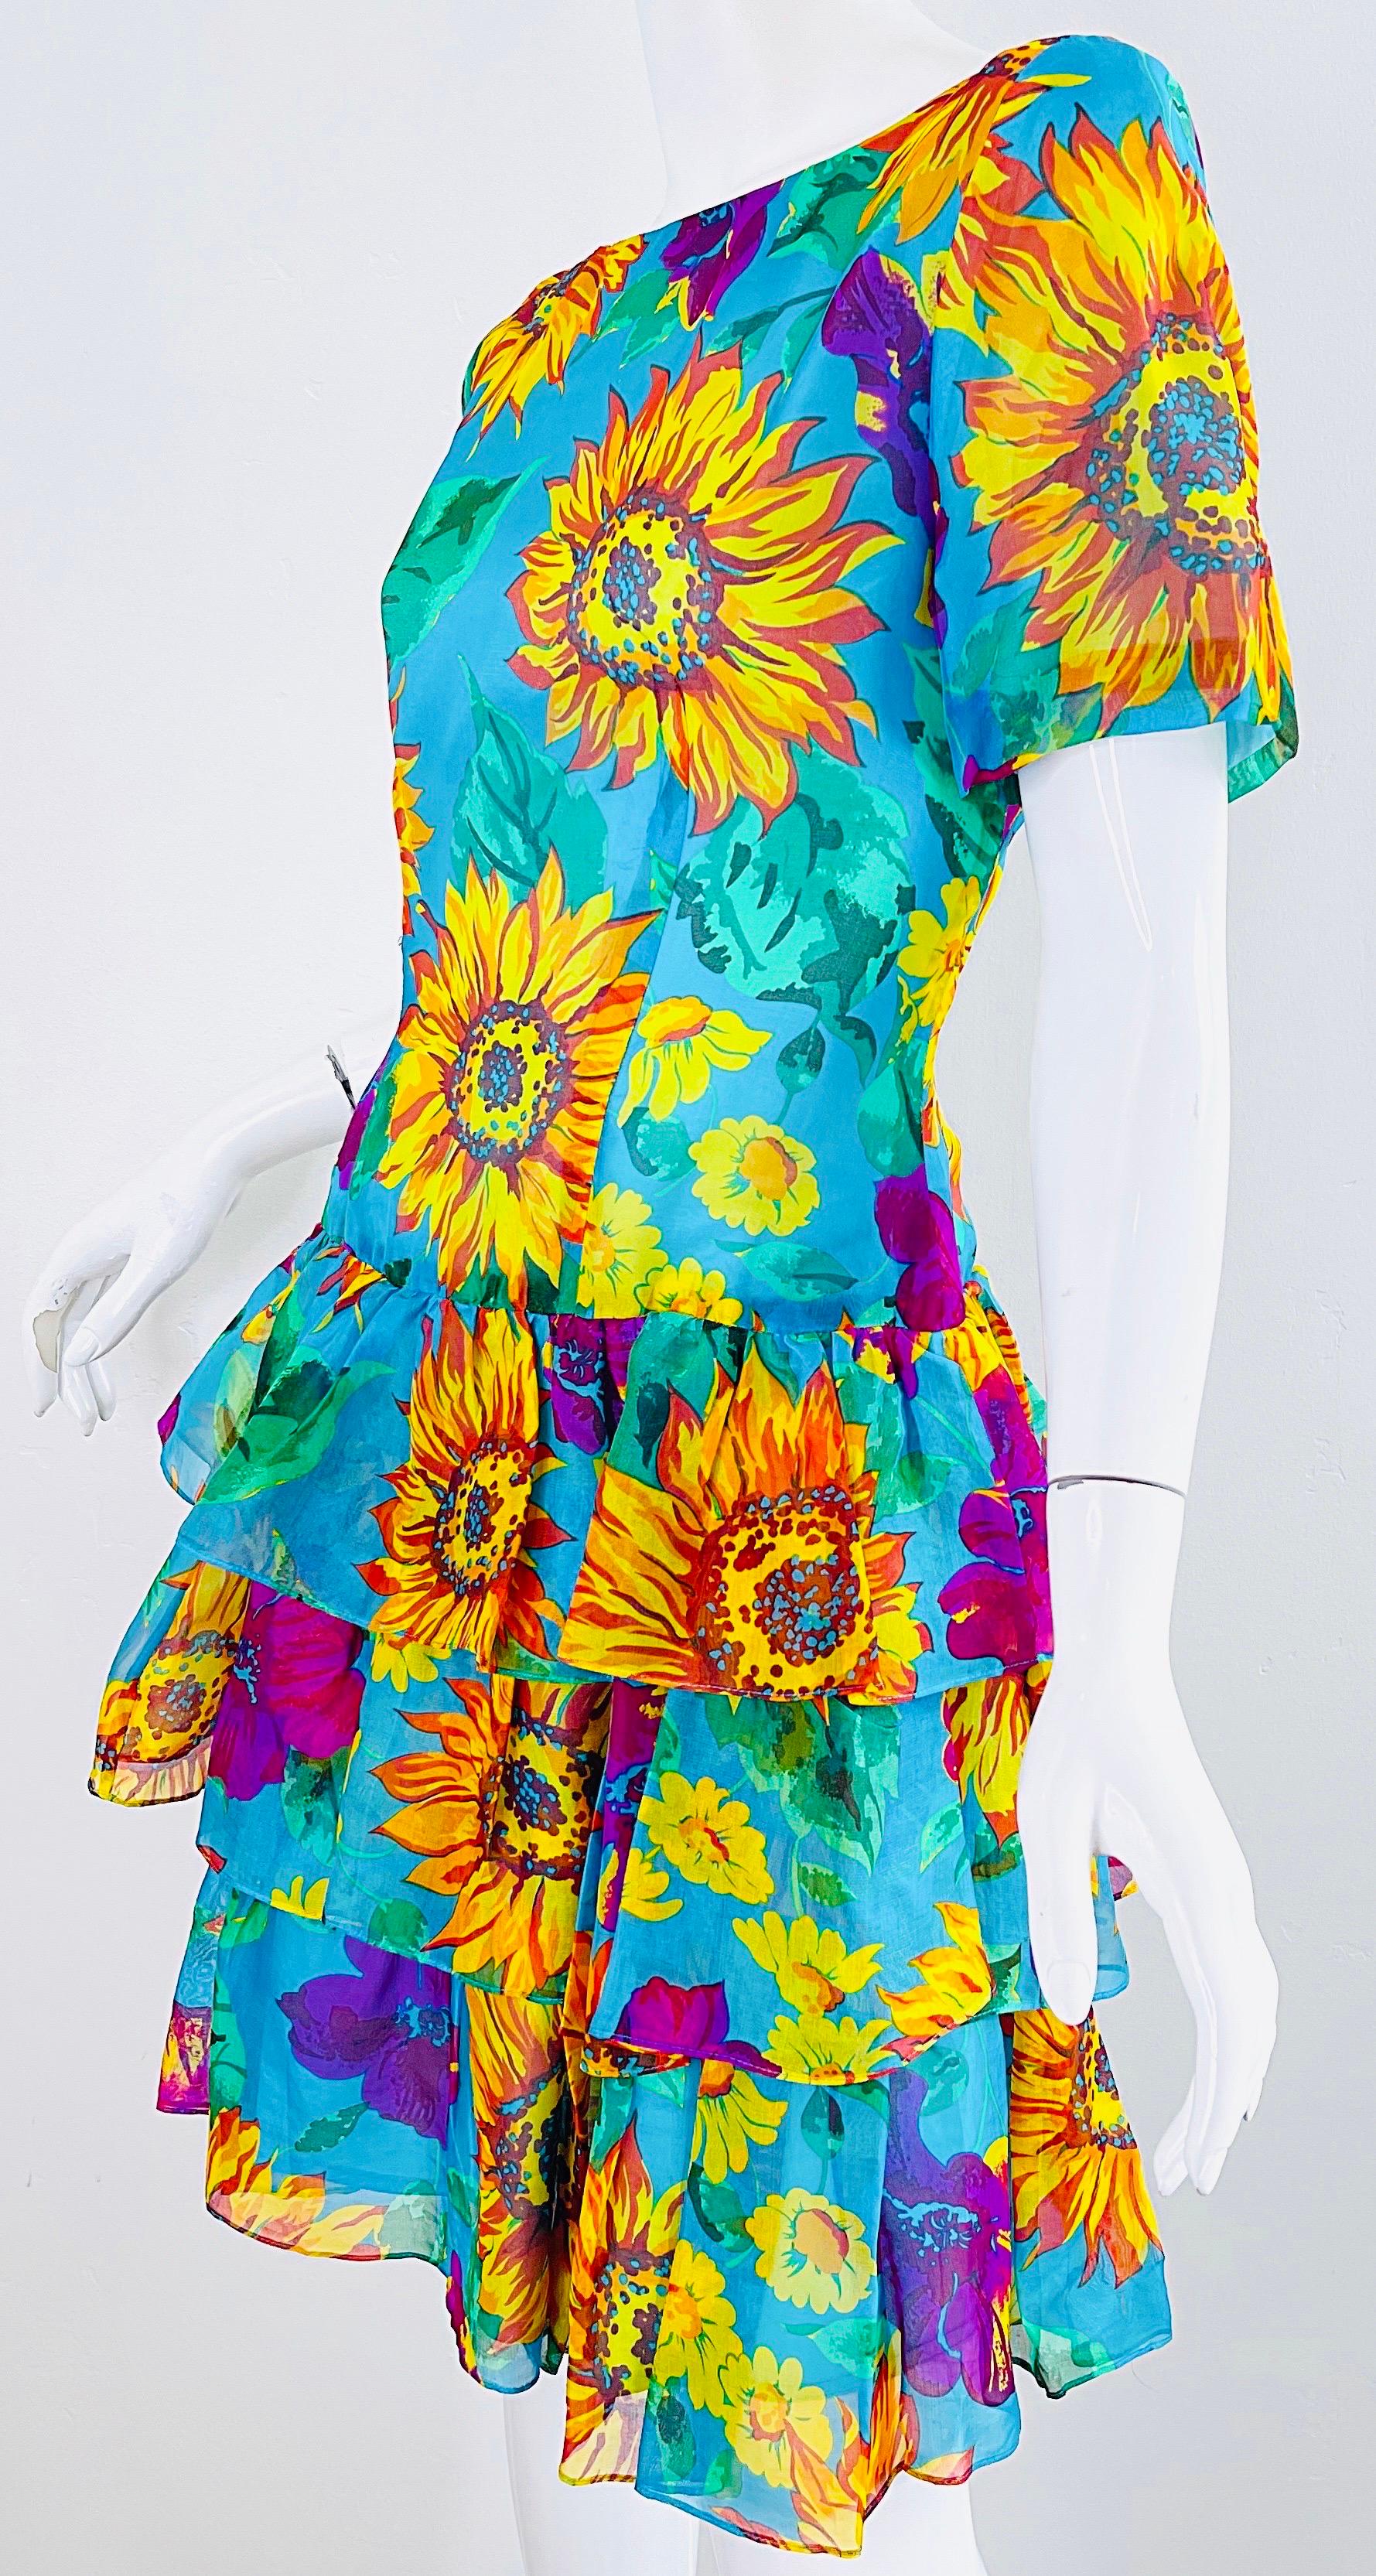 Chic 1980s Silk Chiffon Size 8 / 10 Sunflower Print Turquoise Vintage 80s Dress In Excellent Condition For Sale In San Diego, CA